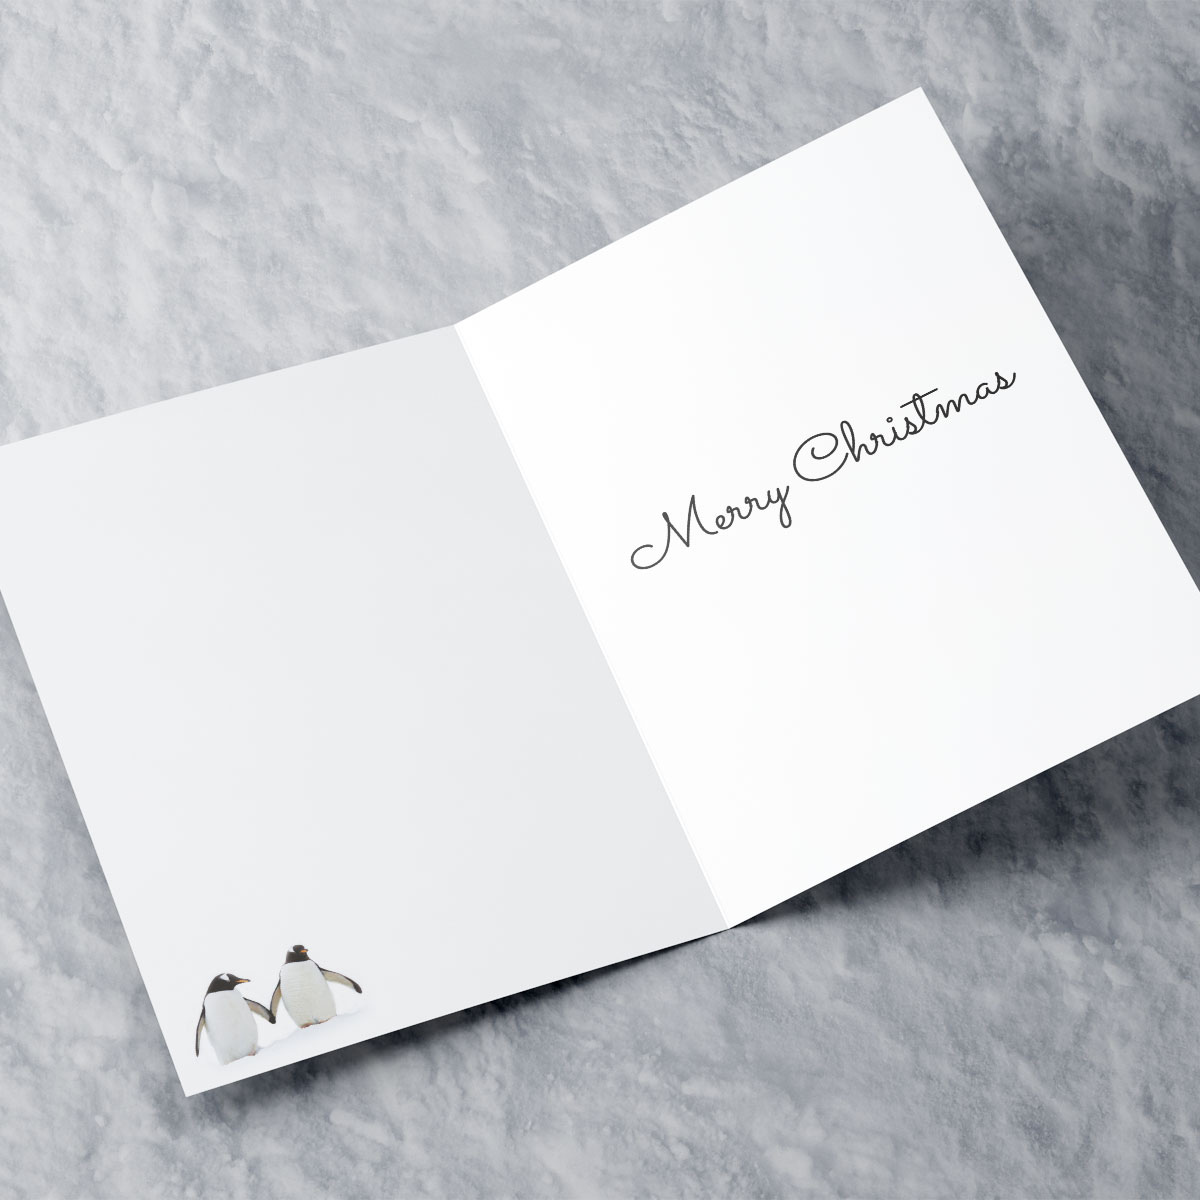 Personalised Christmas Card - Penguins - Daughter and Son-In-Law